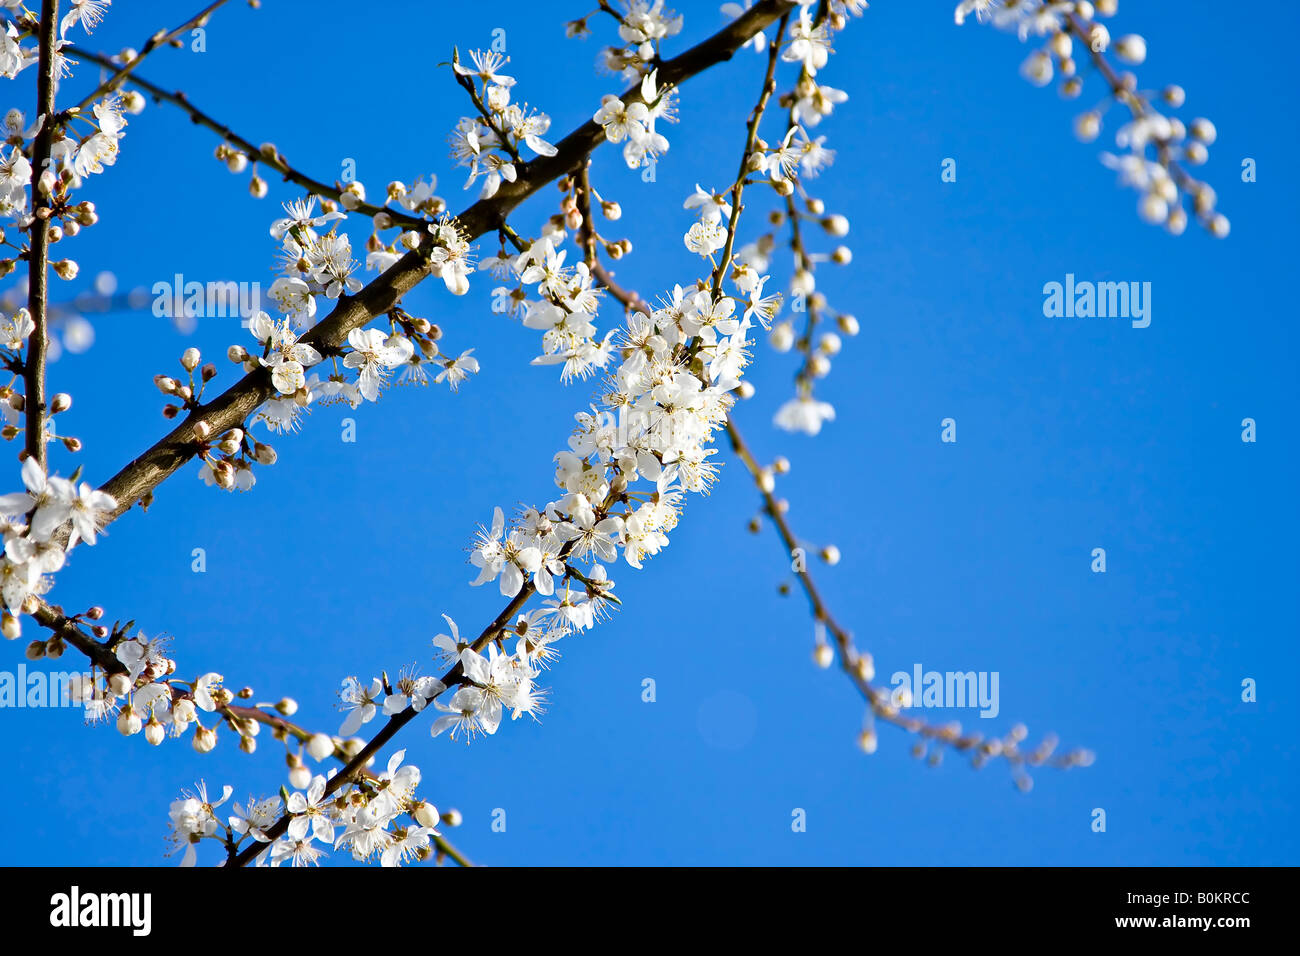 White cherry blossoms with a clear blue sky Shallow d o f Stock Photo